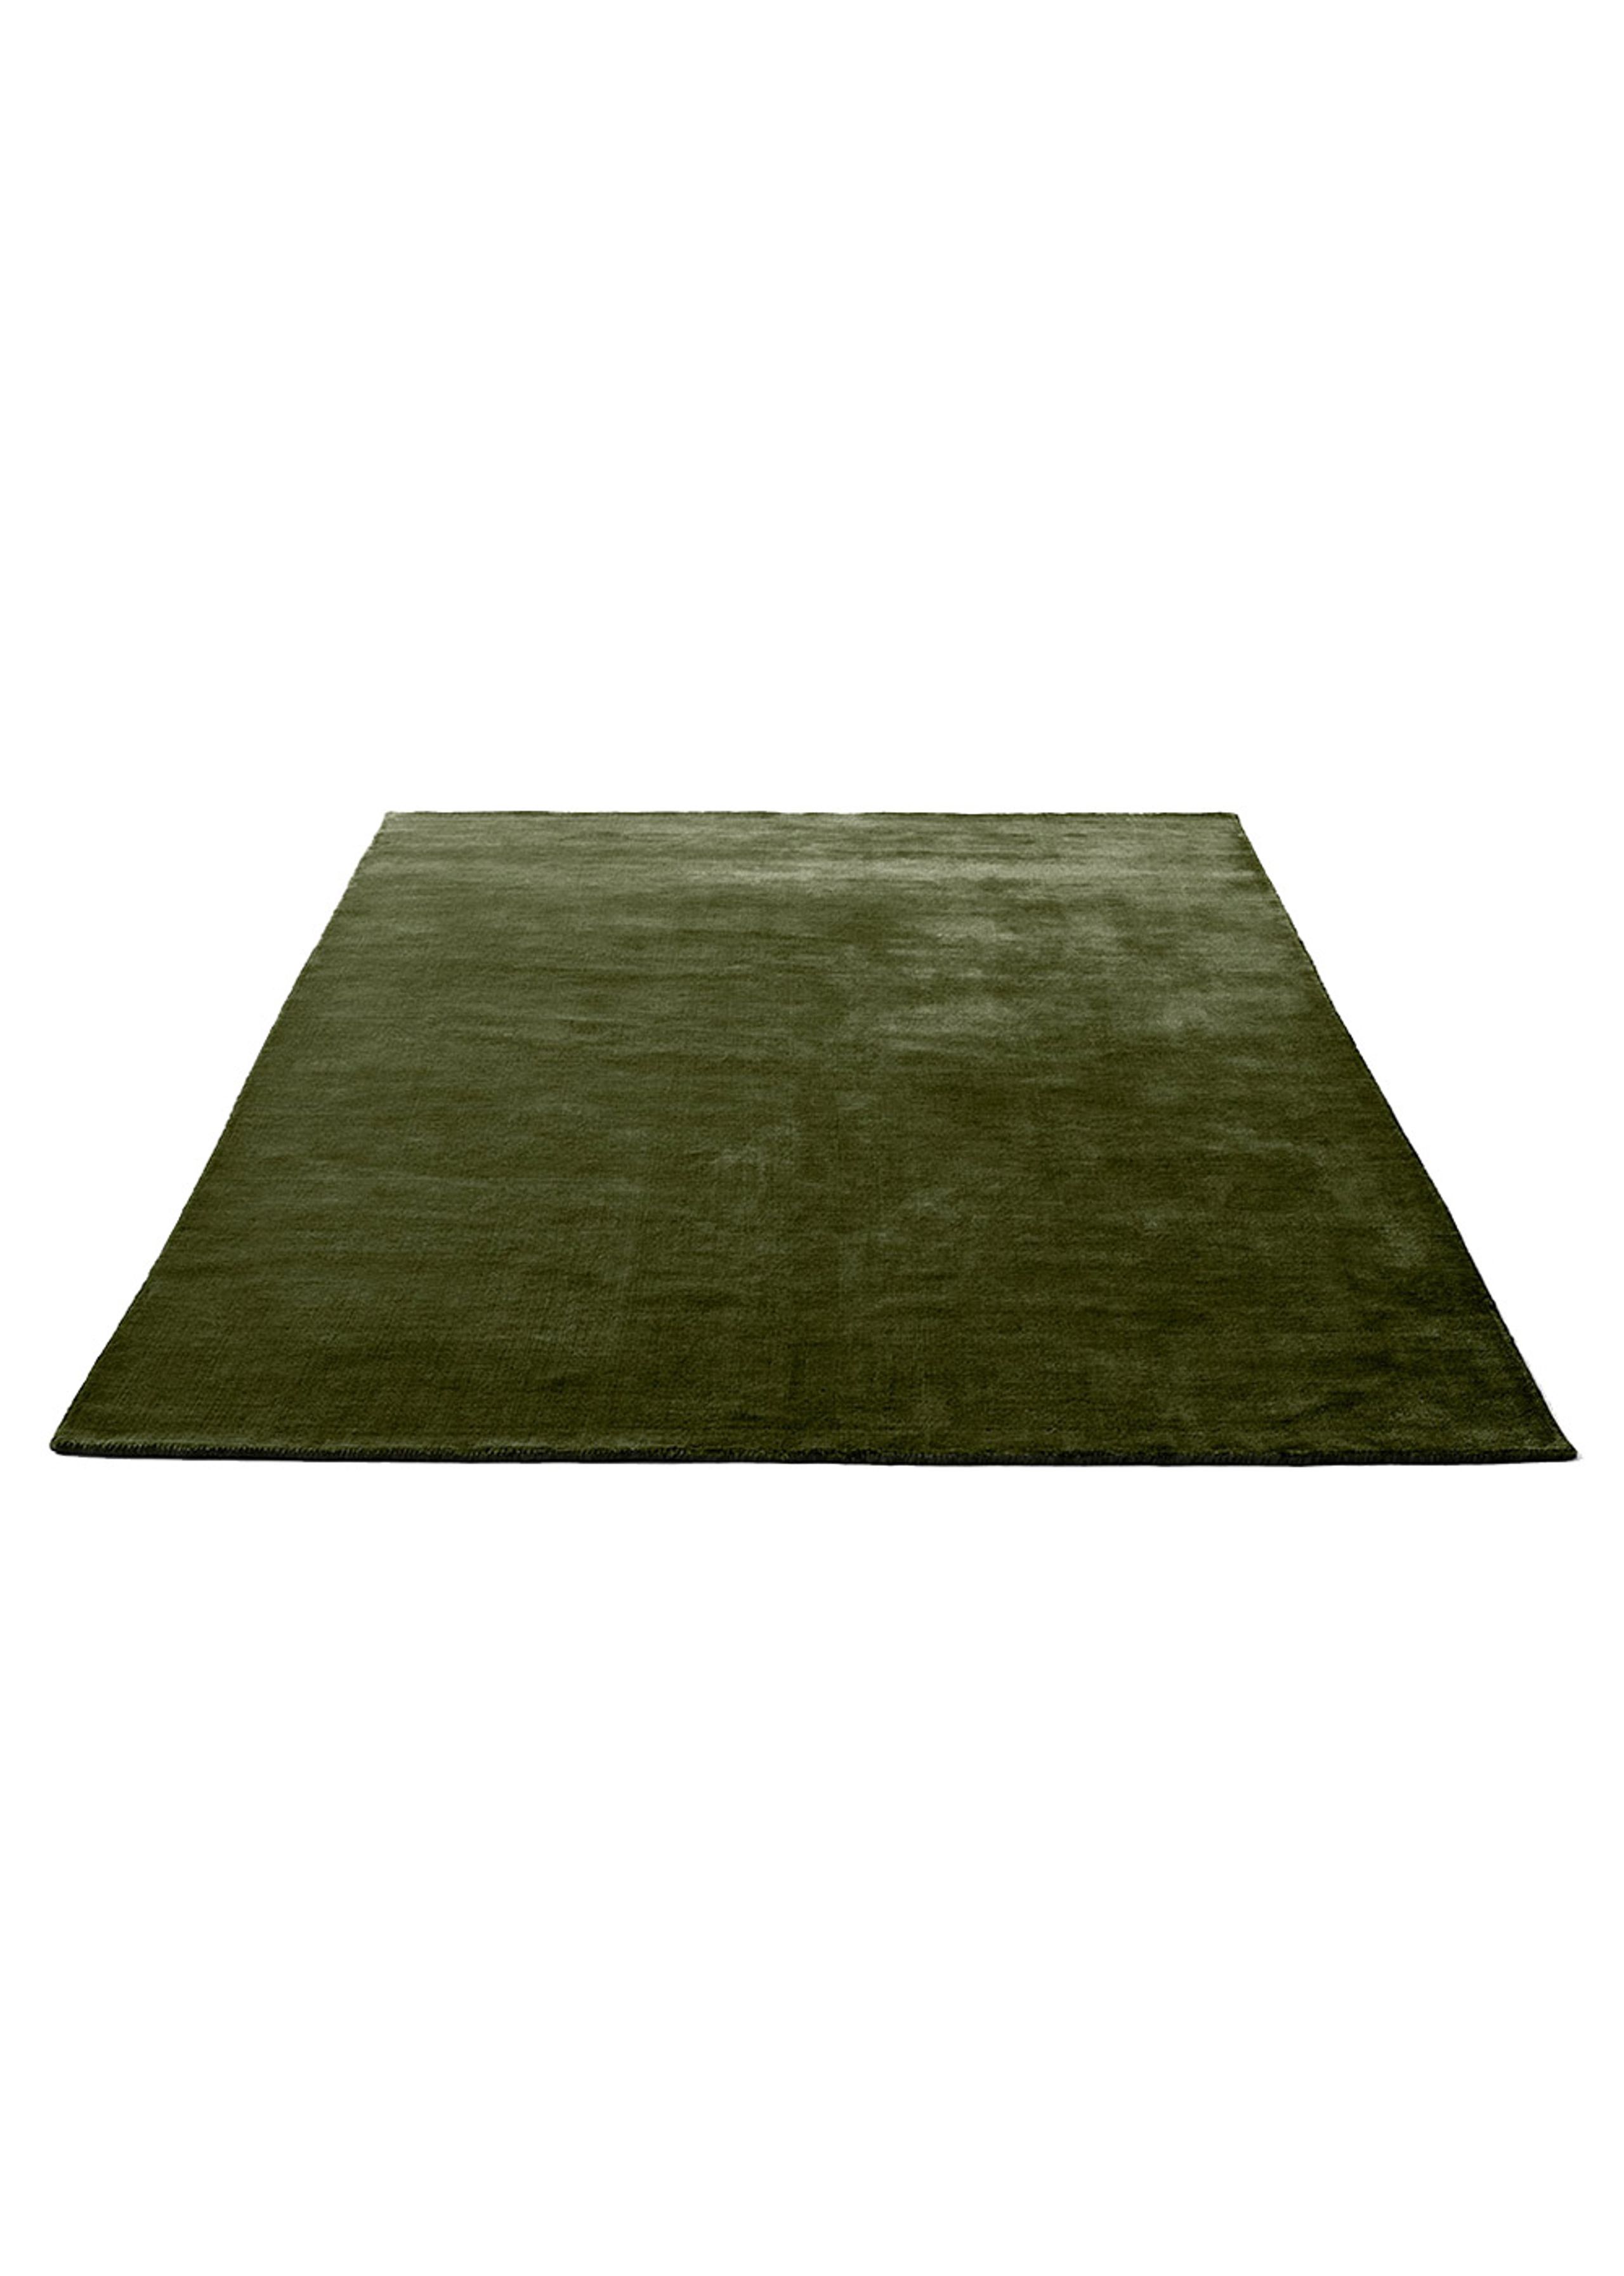 &tradition - Tapete - The Moor Rug - Green Pine / AP7